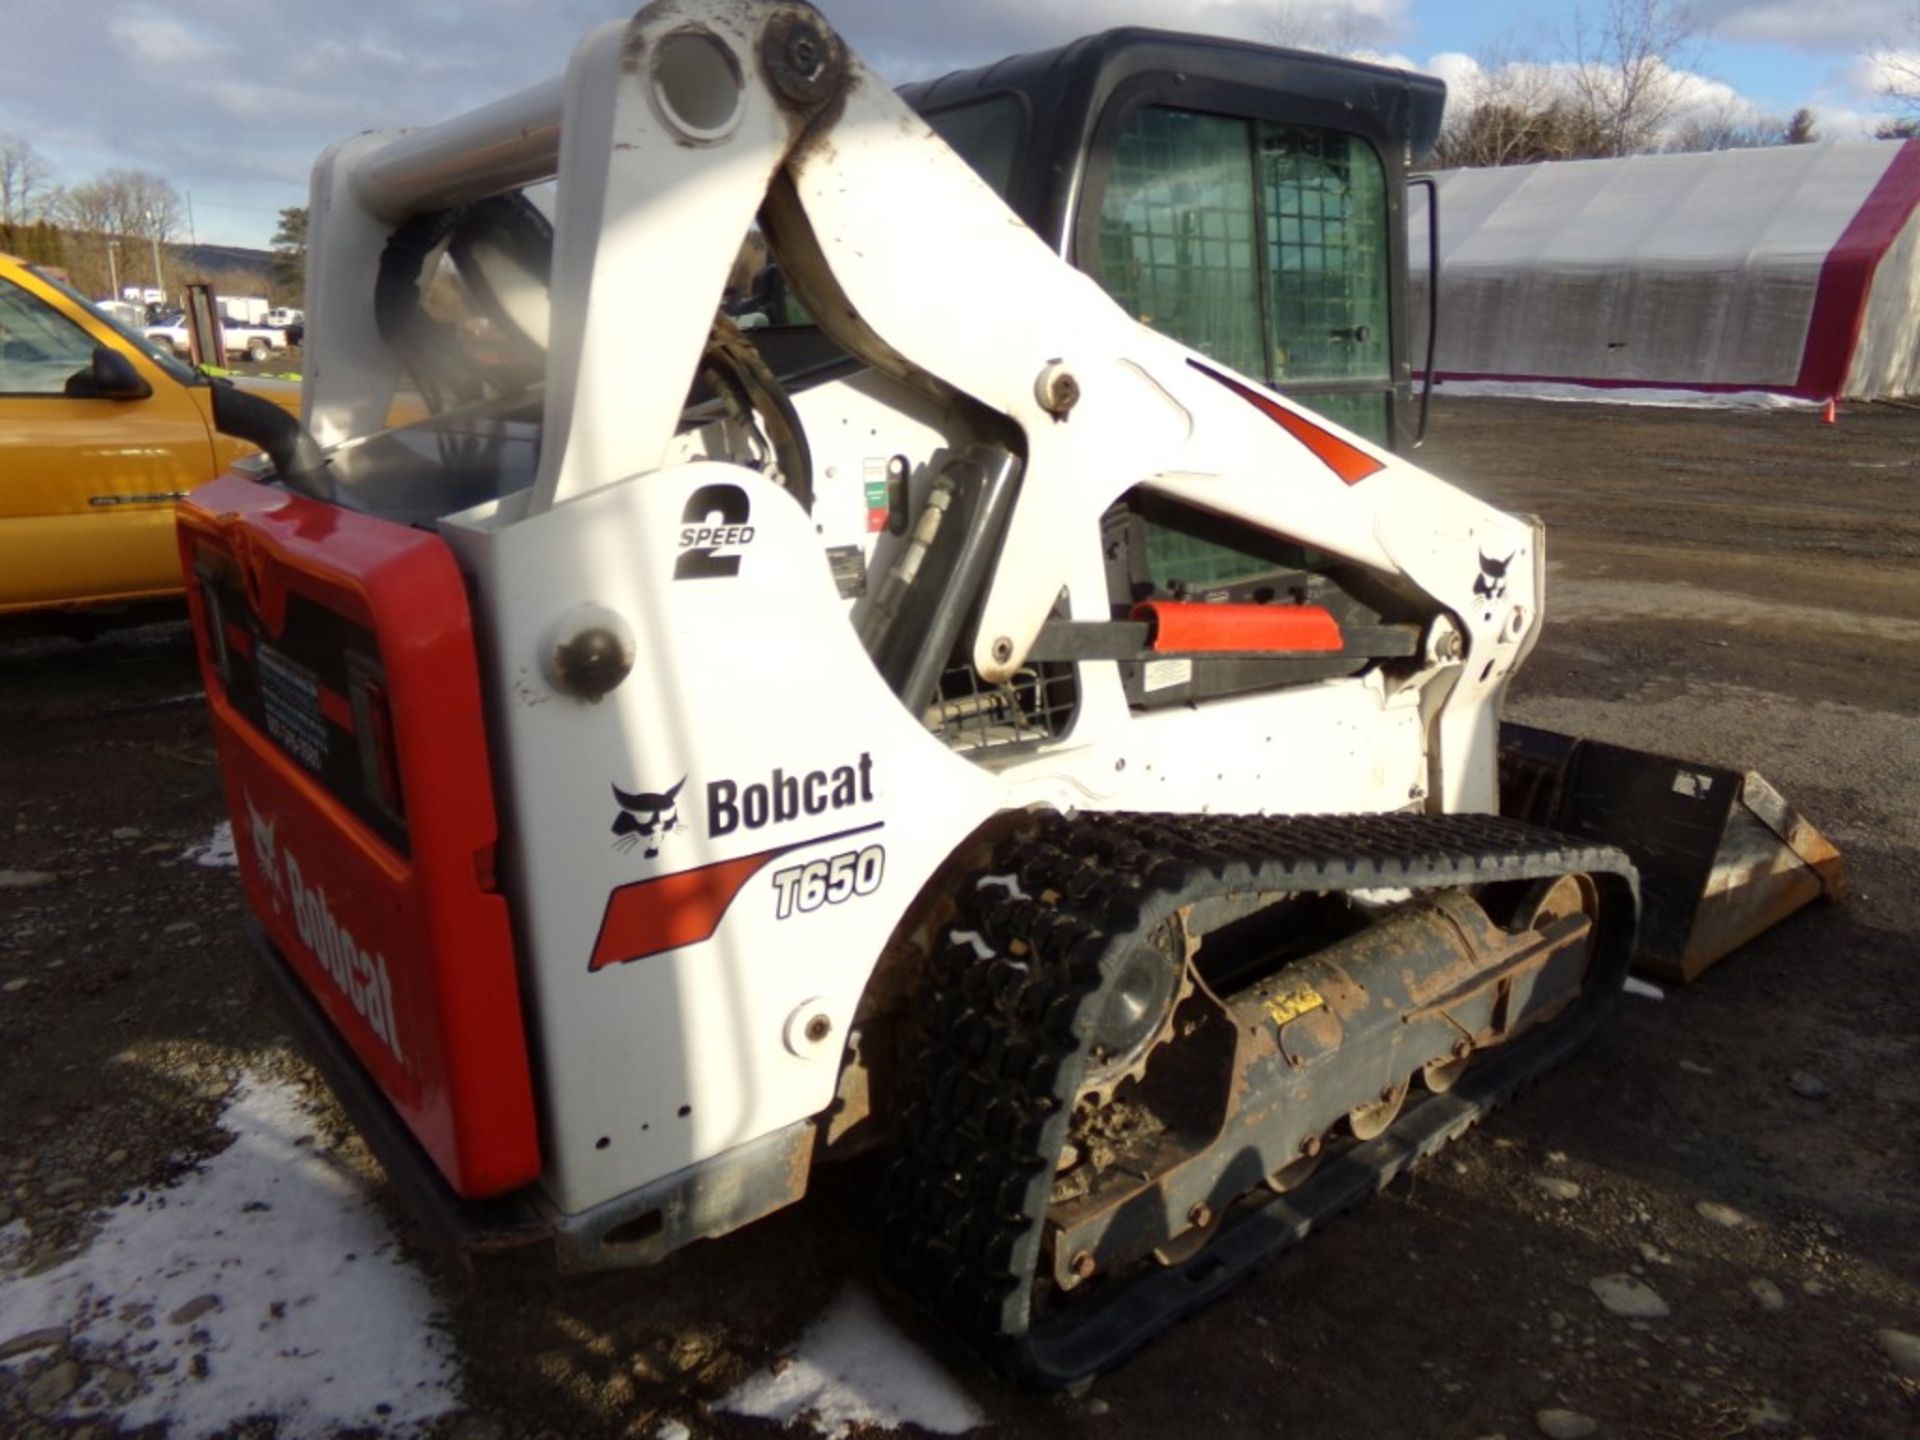 2014 Bobcat T650 Tracked Skid Steer With 78'' Bucket, 1,440 Hours, SerALJG30176, 2 Speed, Full - Image 3 of 7